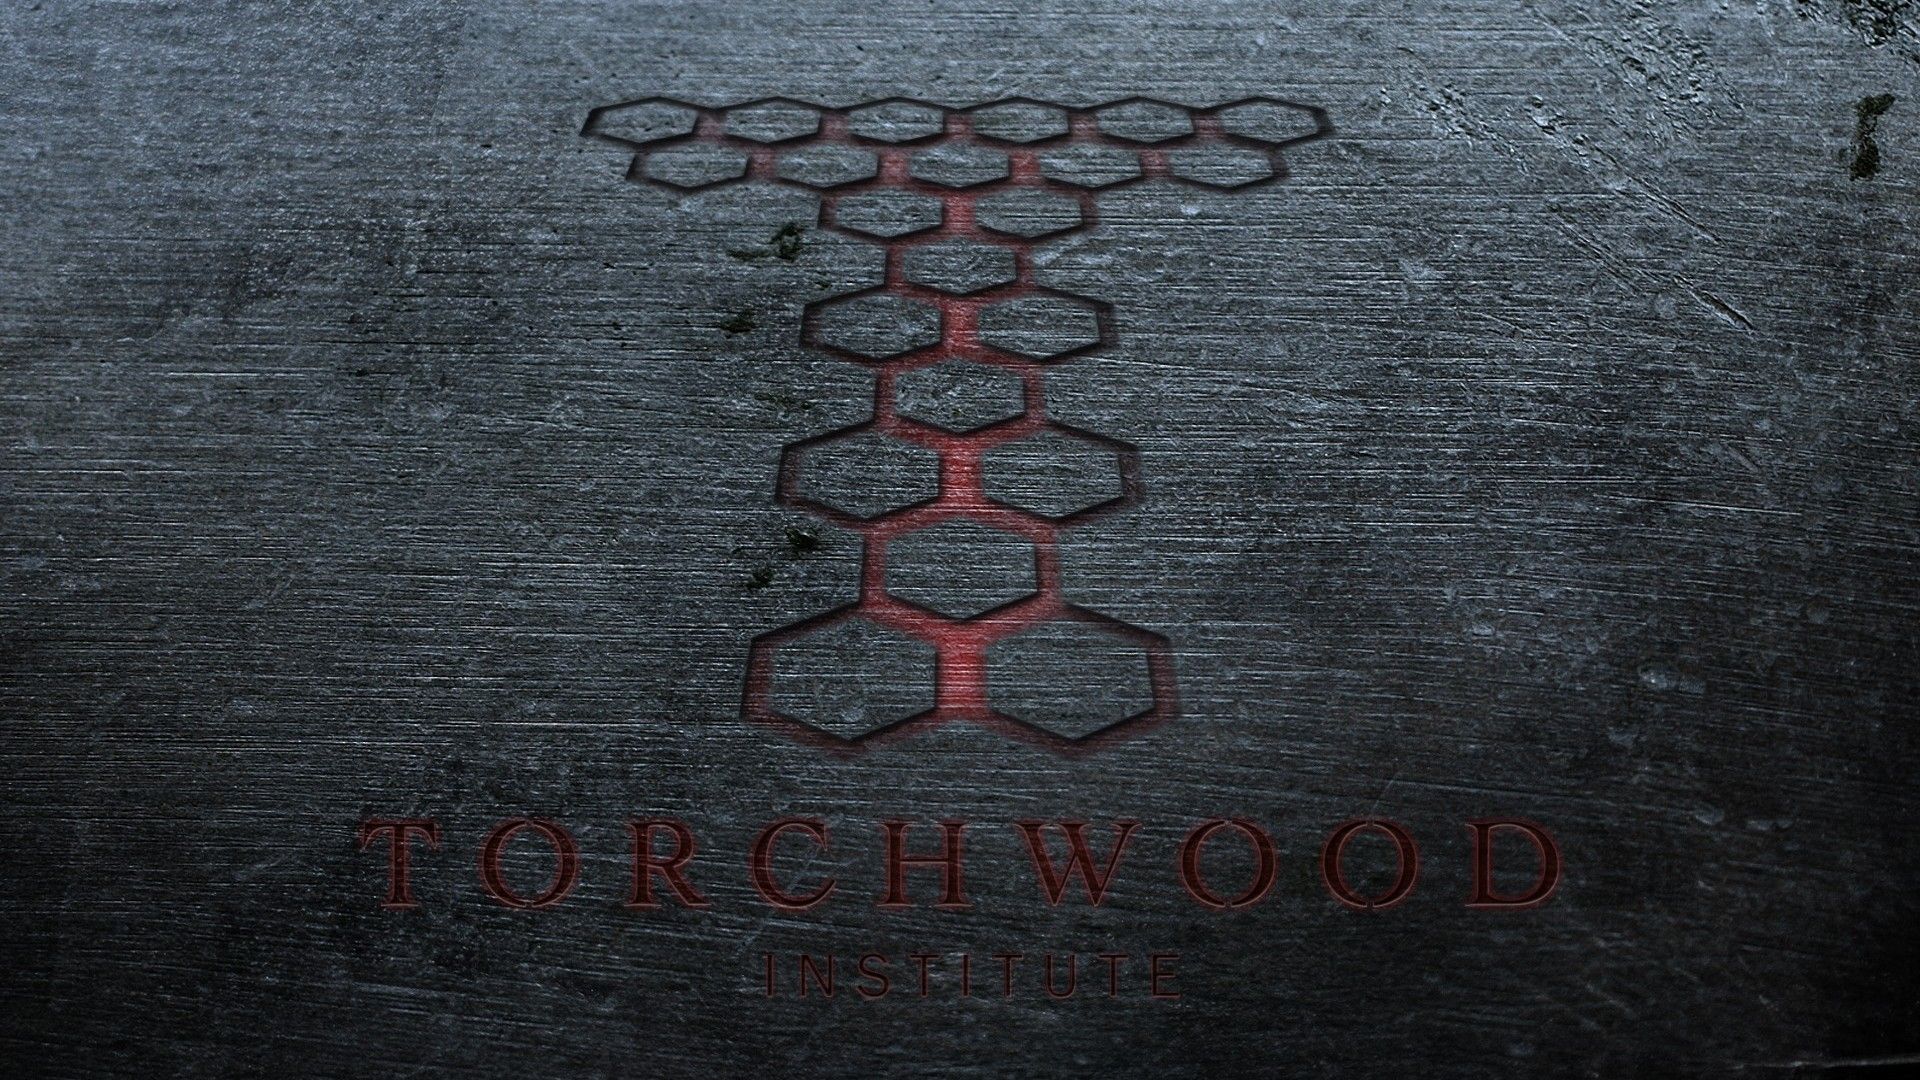 BBC Torchwood HD Wallpaper Download HD Backgrounds